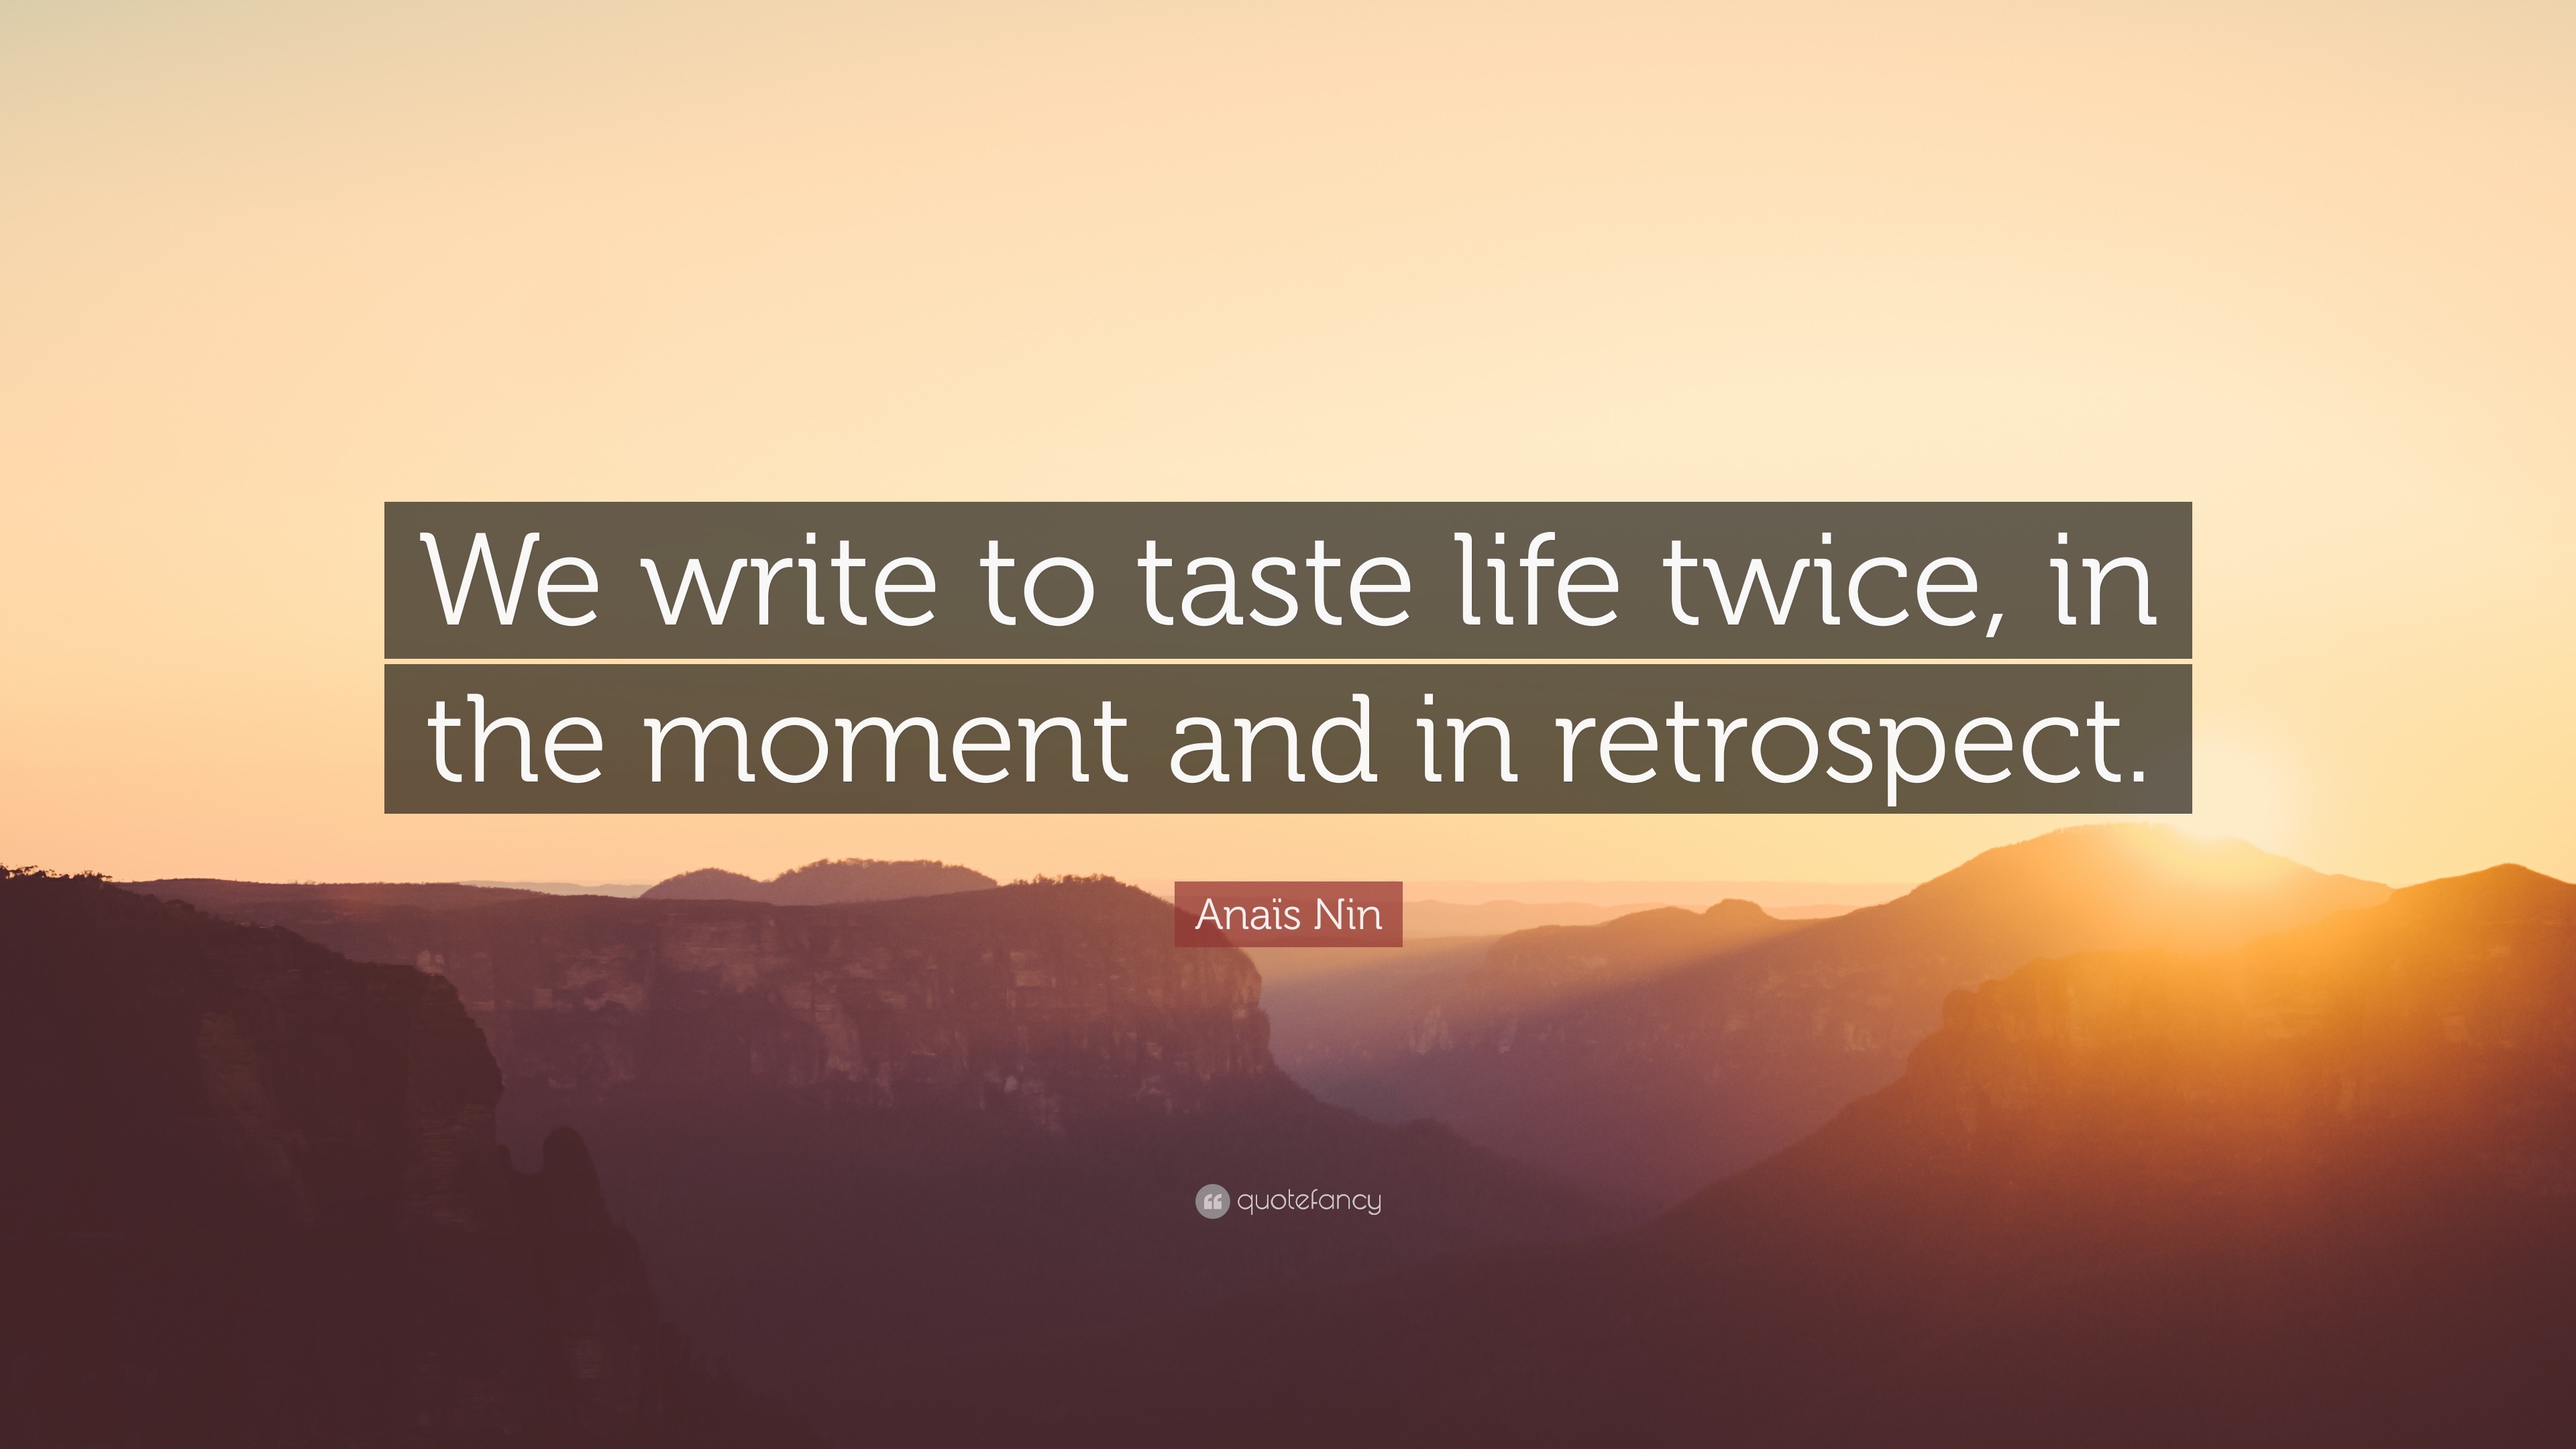 Anaïs Nin Quote: “We write to taste life twice, in the moment and in